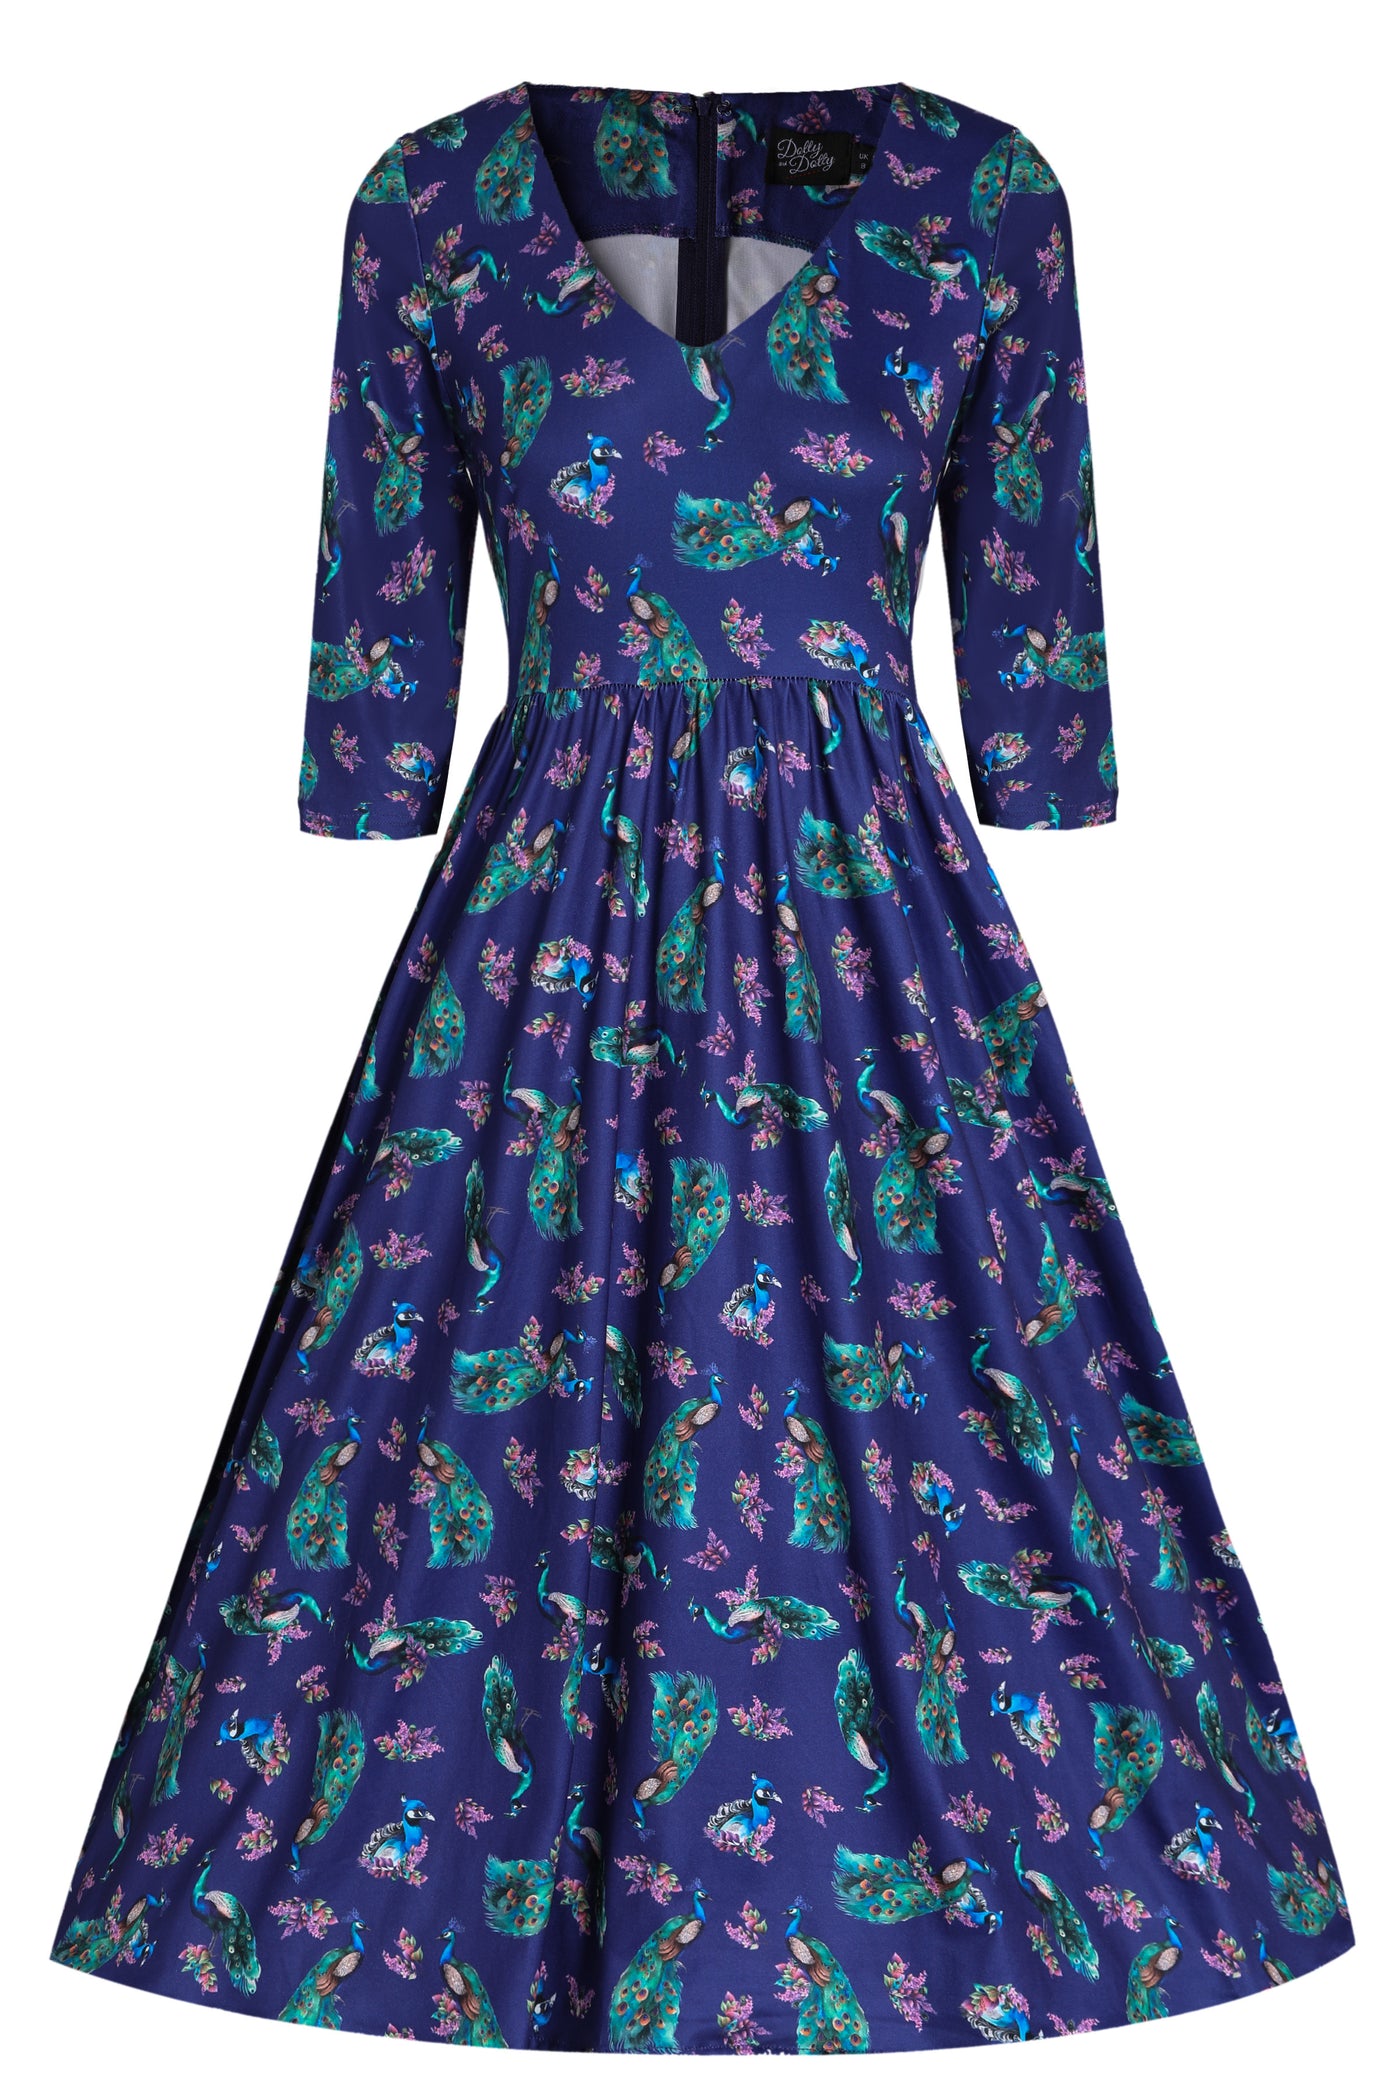 Front view of Purple Dress in Peacock Birds Floral Print